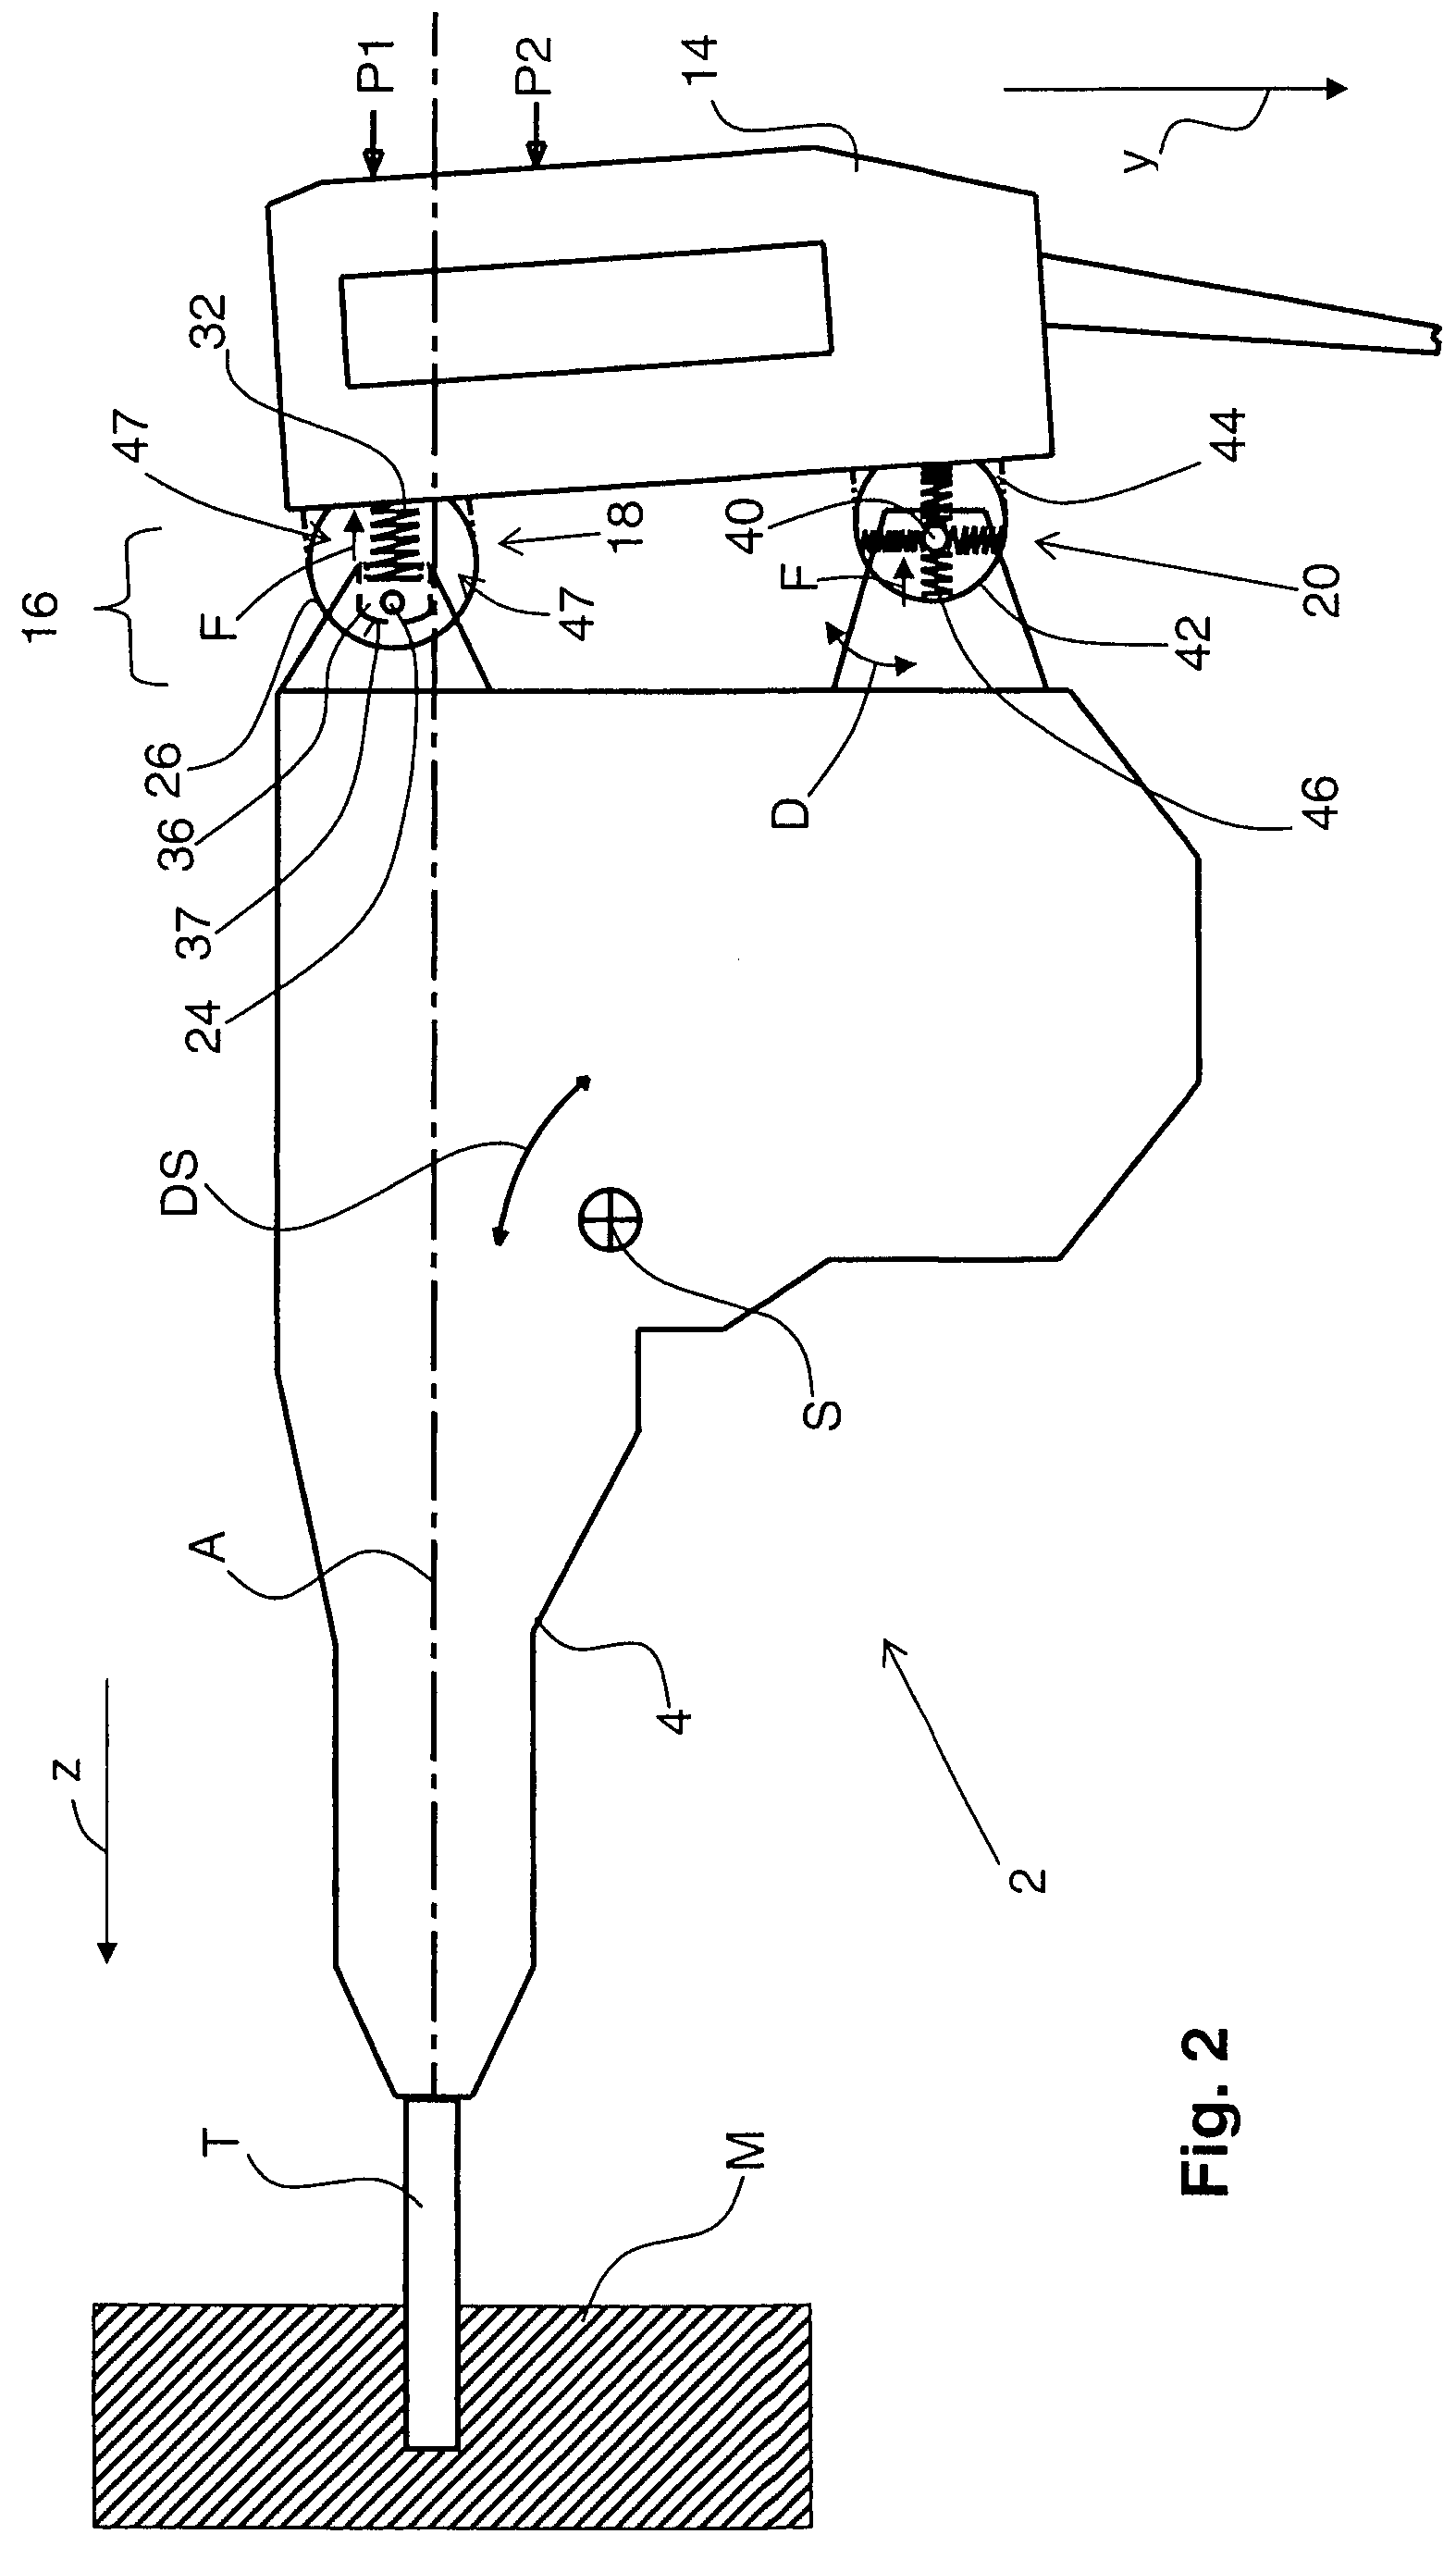 Hand-held power tool with a decoupling device